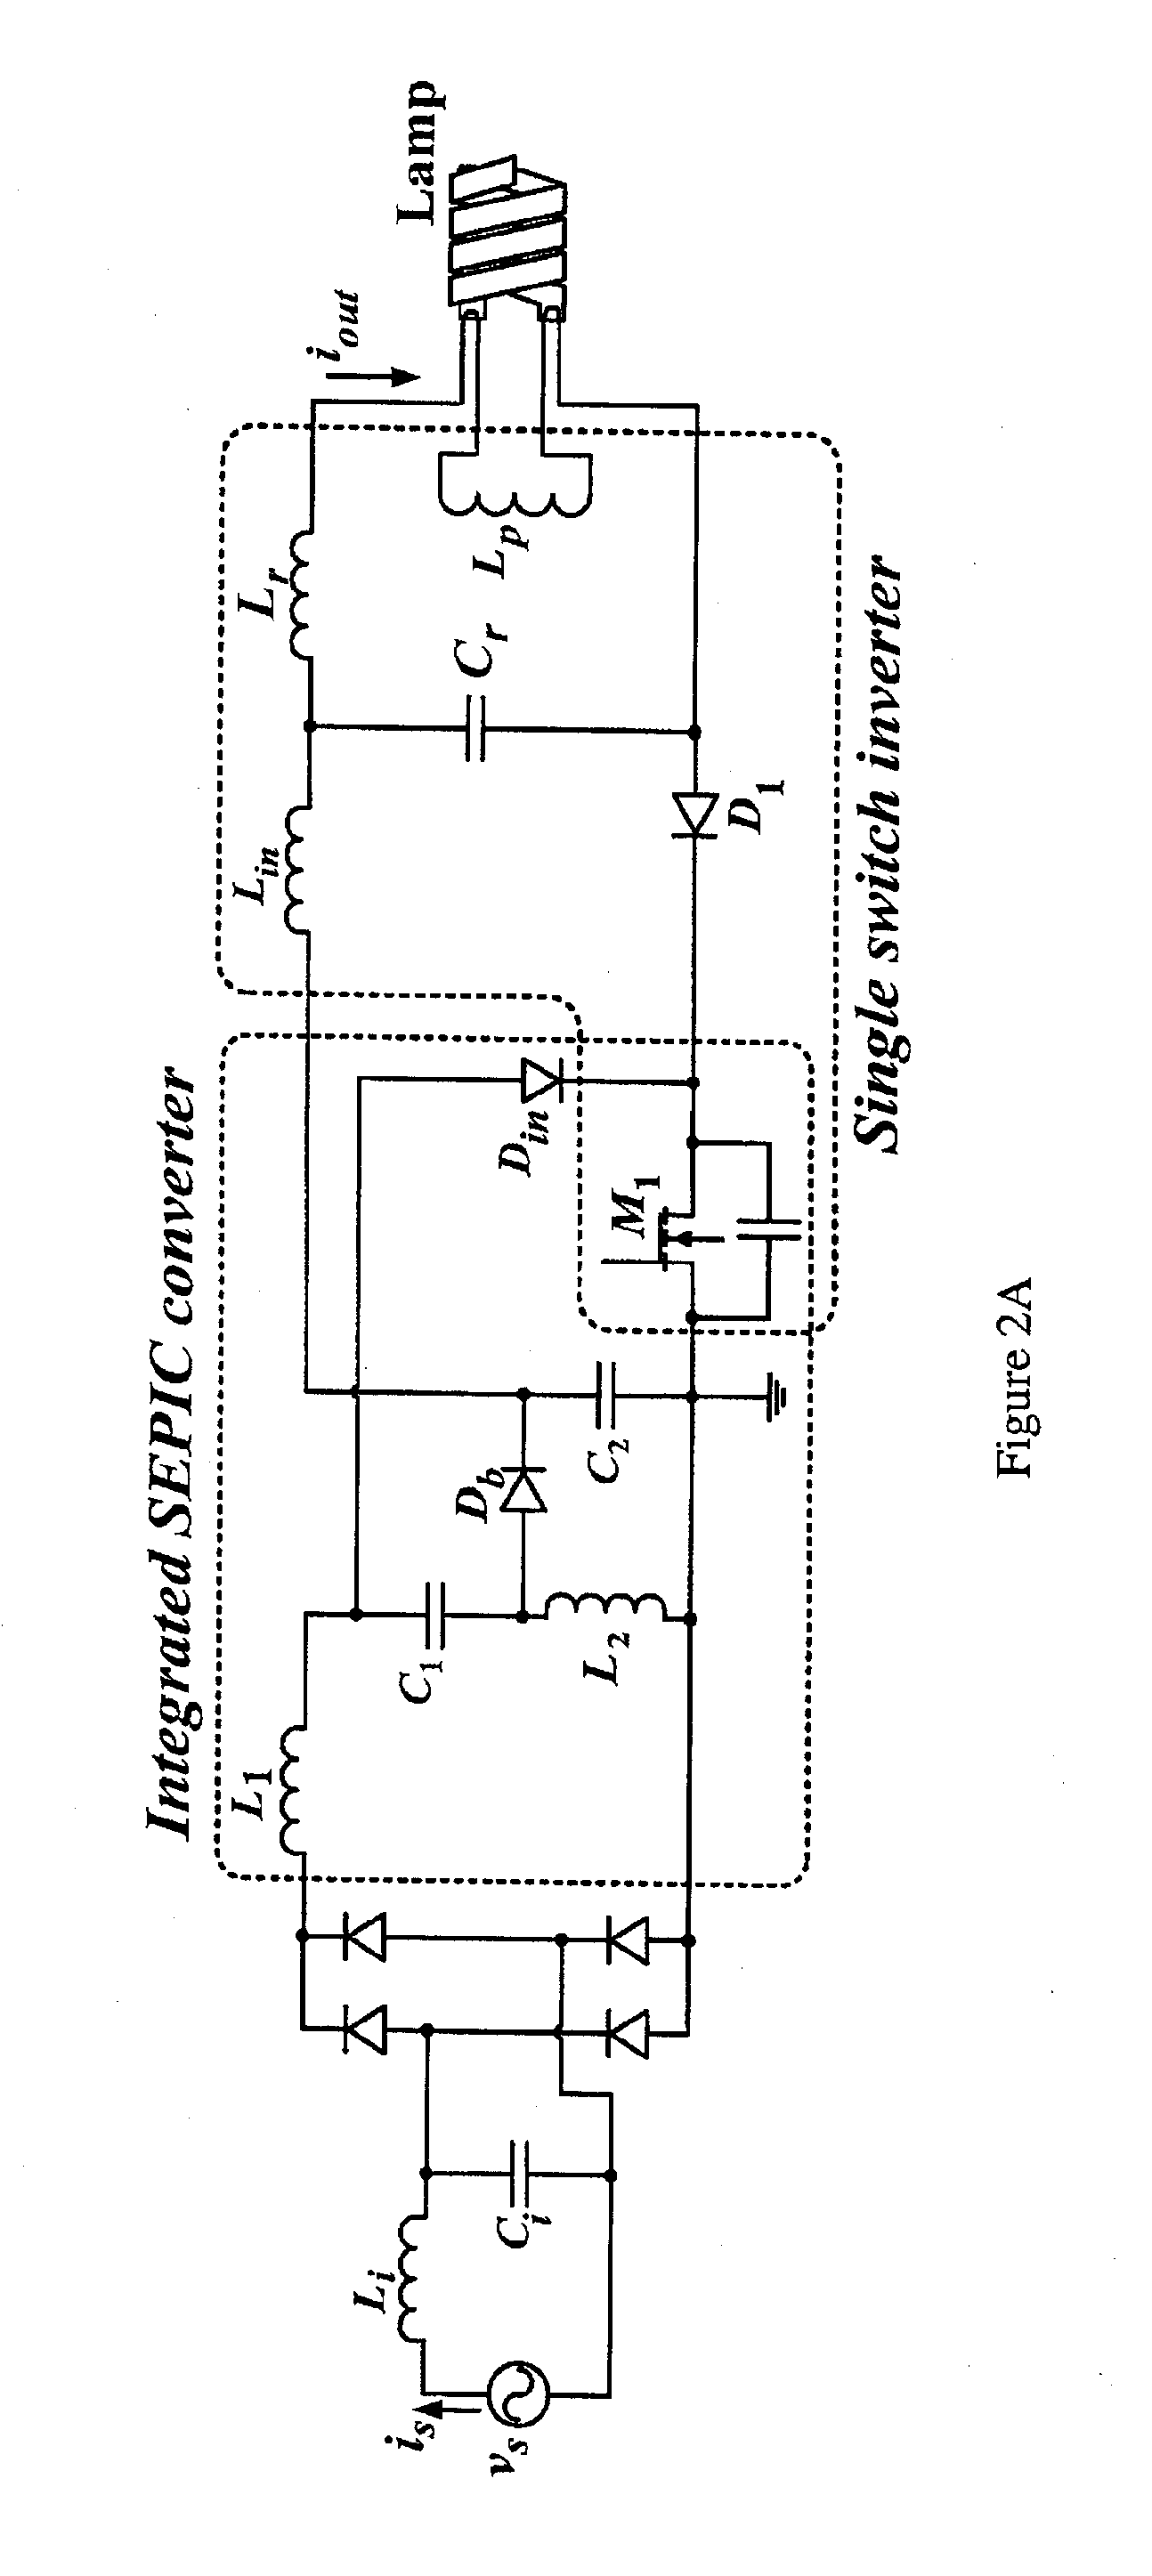 Electronic Ballast with High Power Factor